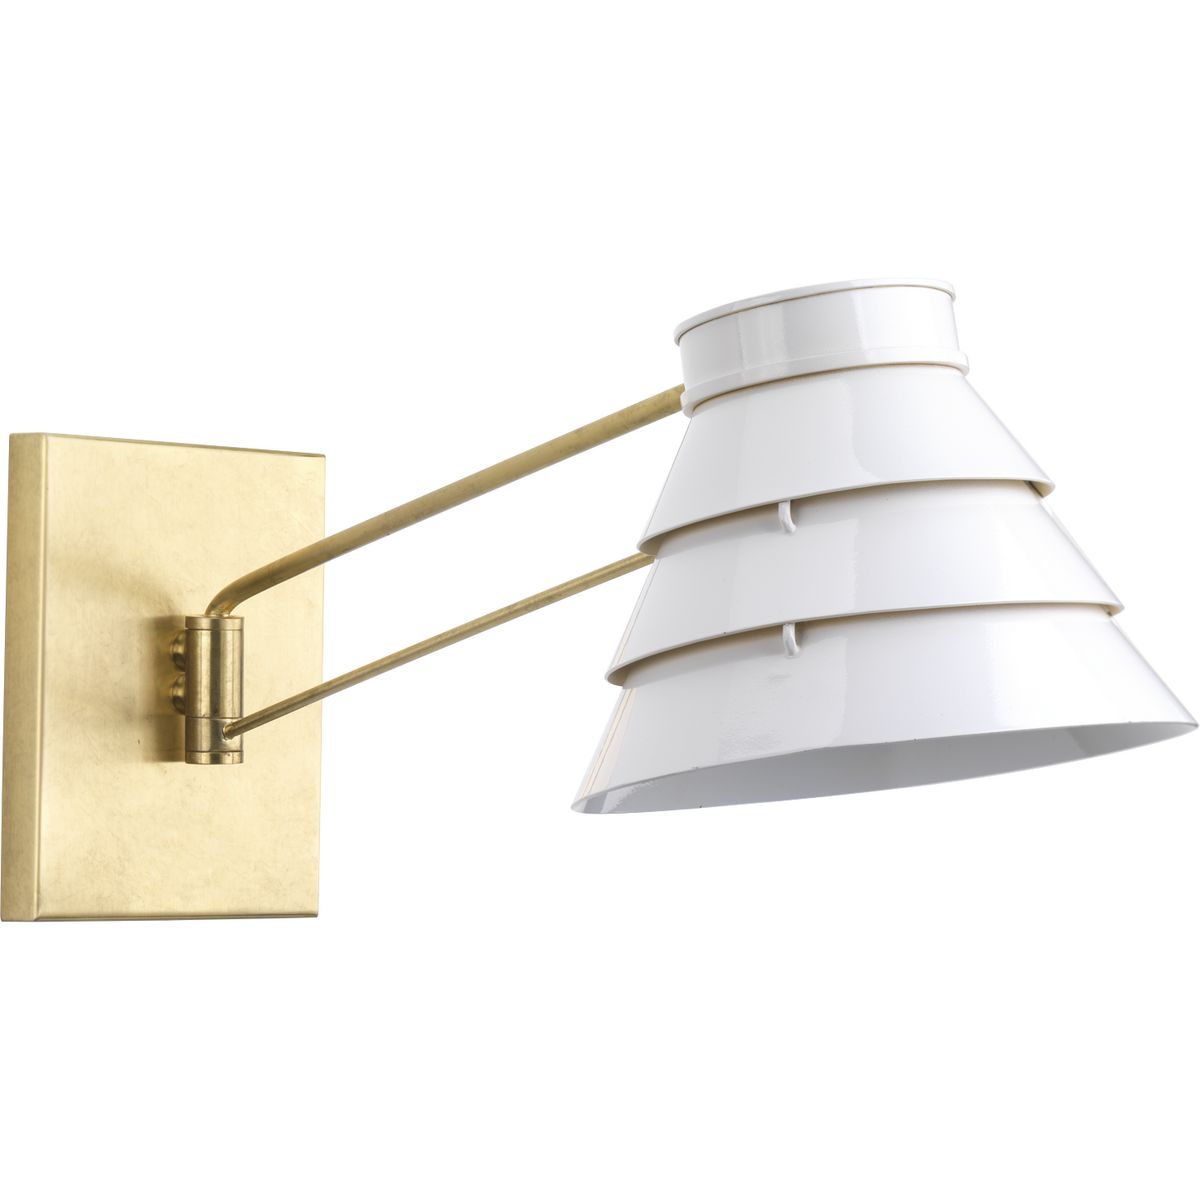 Mixed metallics combined with a modern take on light and movement characterizes the Onshore series by Jeffrey Alan Marks. The Onshore swing arm wall sconce has a flared shade created by a trio of bright white enamel bands, offering reflective surfaces that personify a fresh and uplifting choice for casual living. The adjustable arm extends from rectangular back plate via two parallel strips of lightly textured Brushed Brass, cradling the shade with industrial flair and providing a vibrant wash of downlight wherever ambient light is needed. This family of fixtures is part of the Jeffrey Alan Marks Point Dume� lighting collection which celebrates a curated mix of yesterday and today, distilling both industrial and artisanal influences.